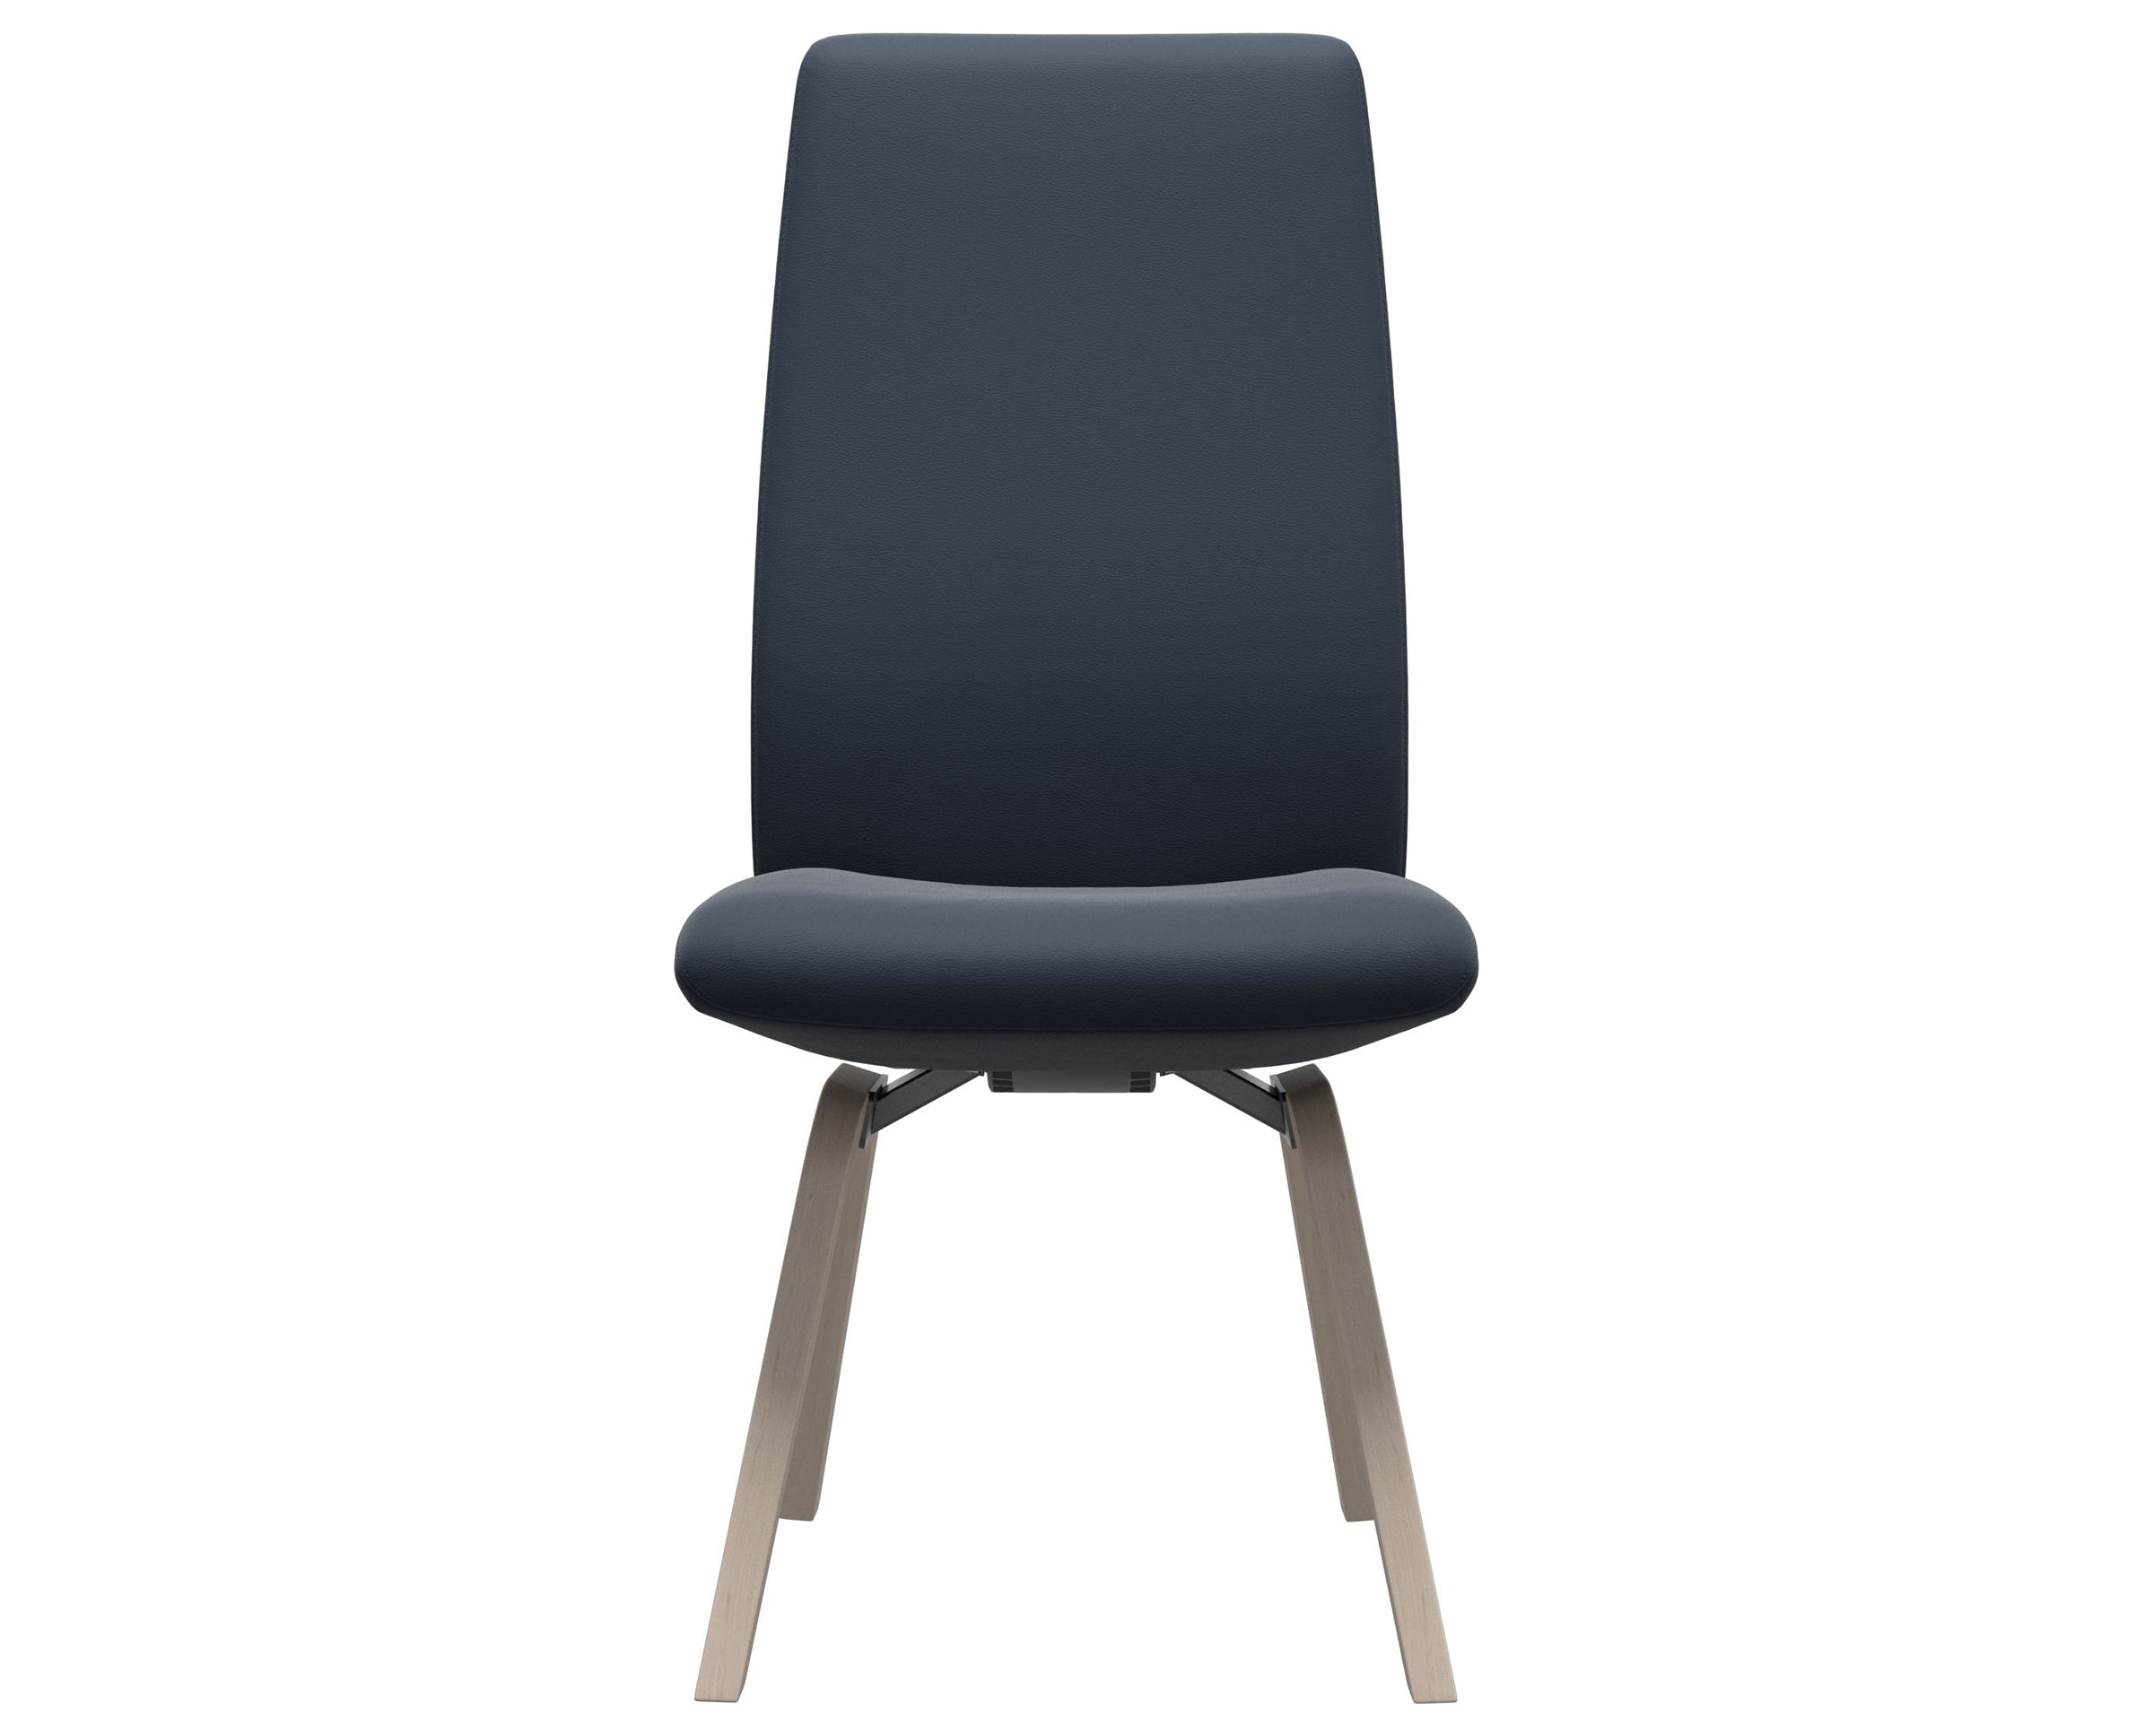 Paloma Leather Oxford Blue and Whitewash Base | Stressless Laurel High Back D200 Dining Chair | Valley Ridge Furniture